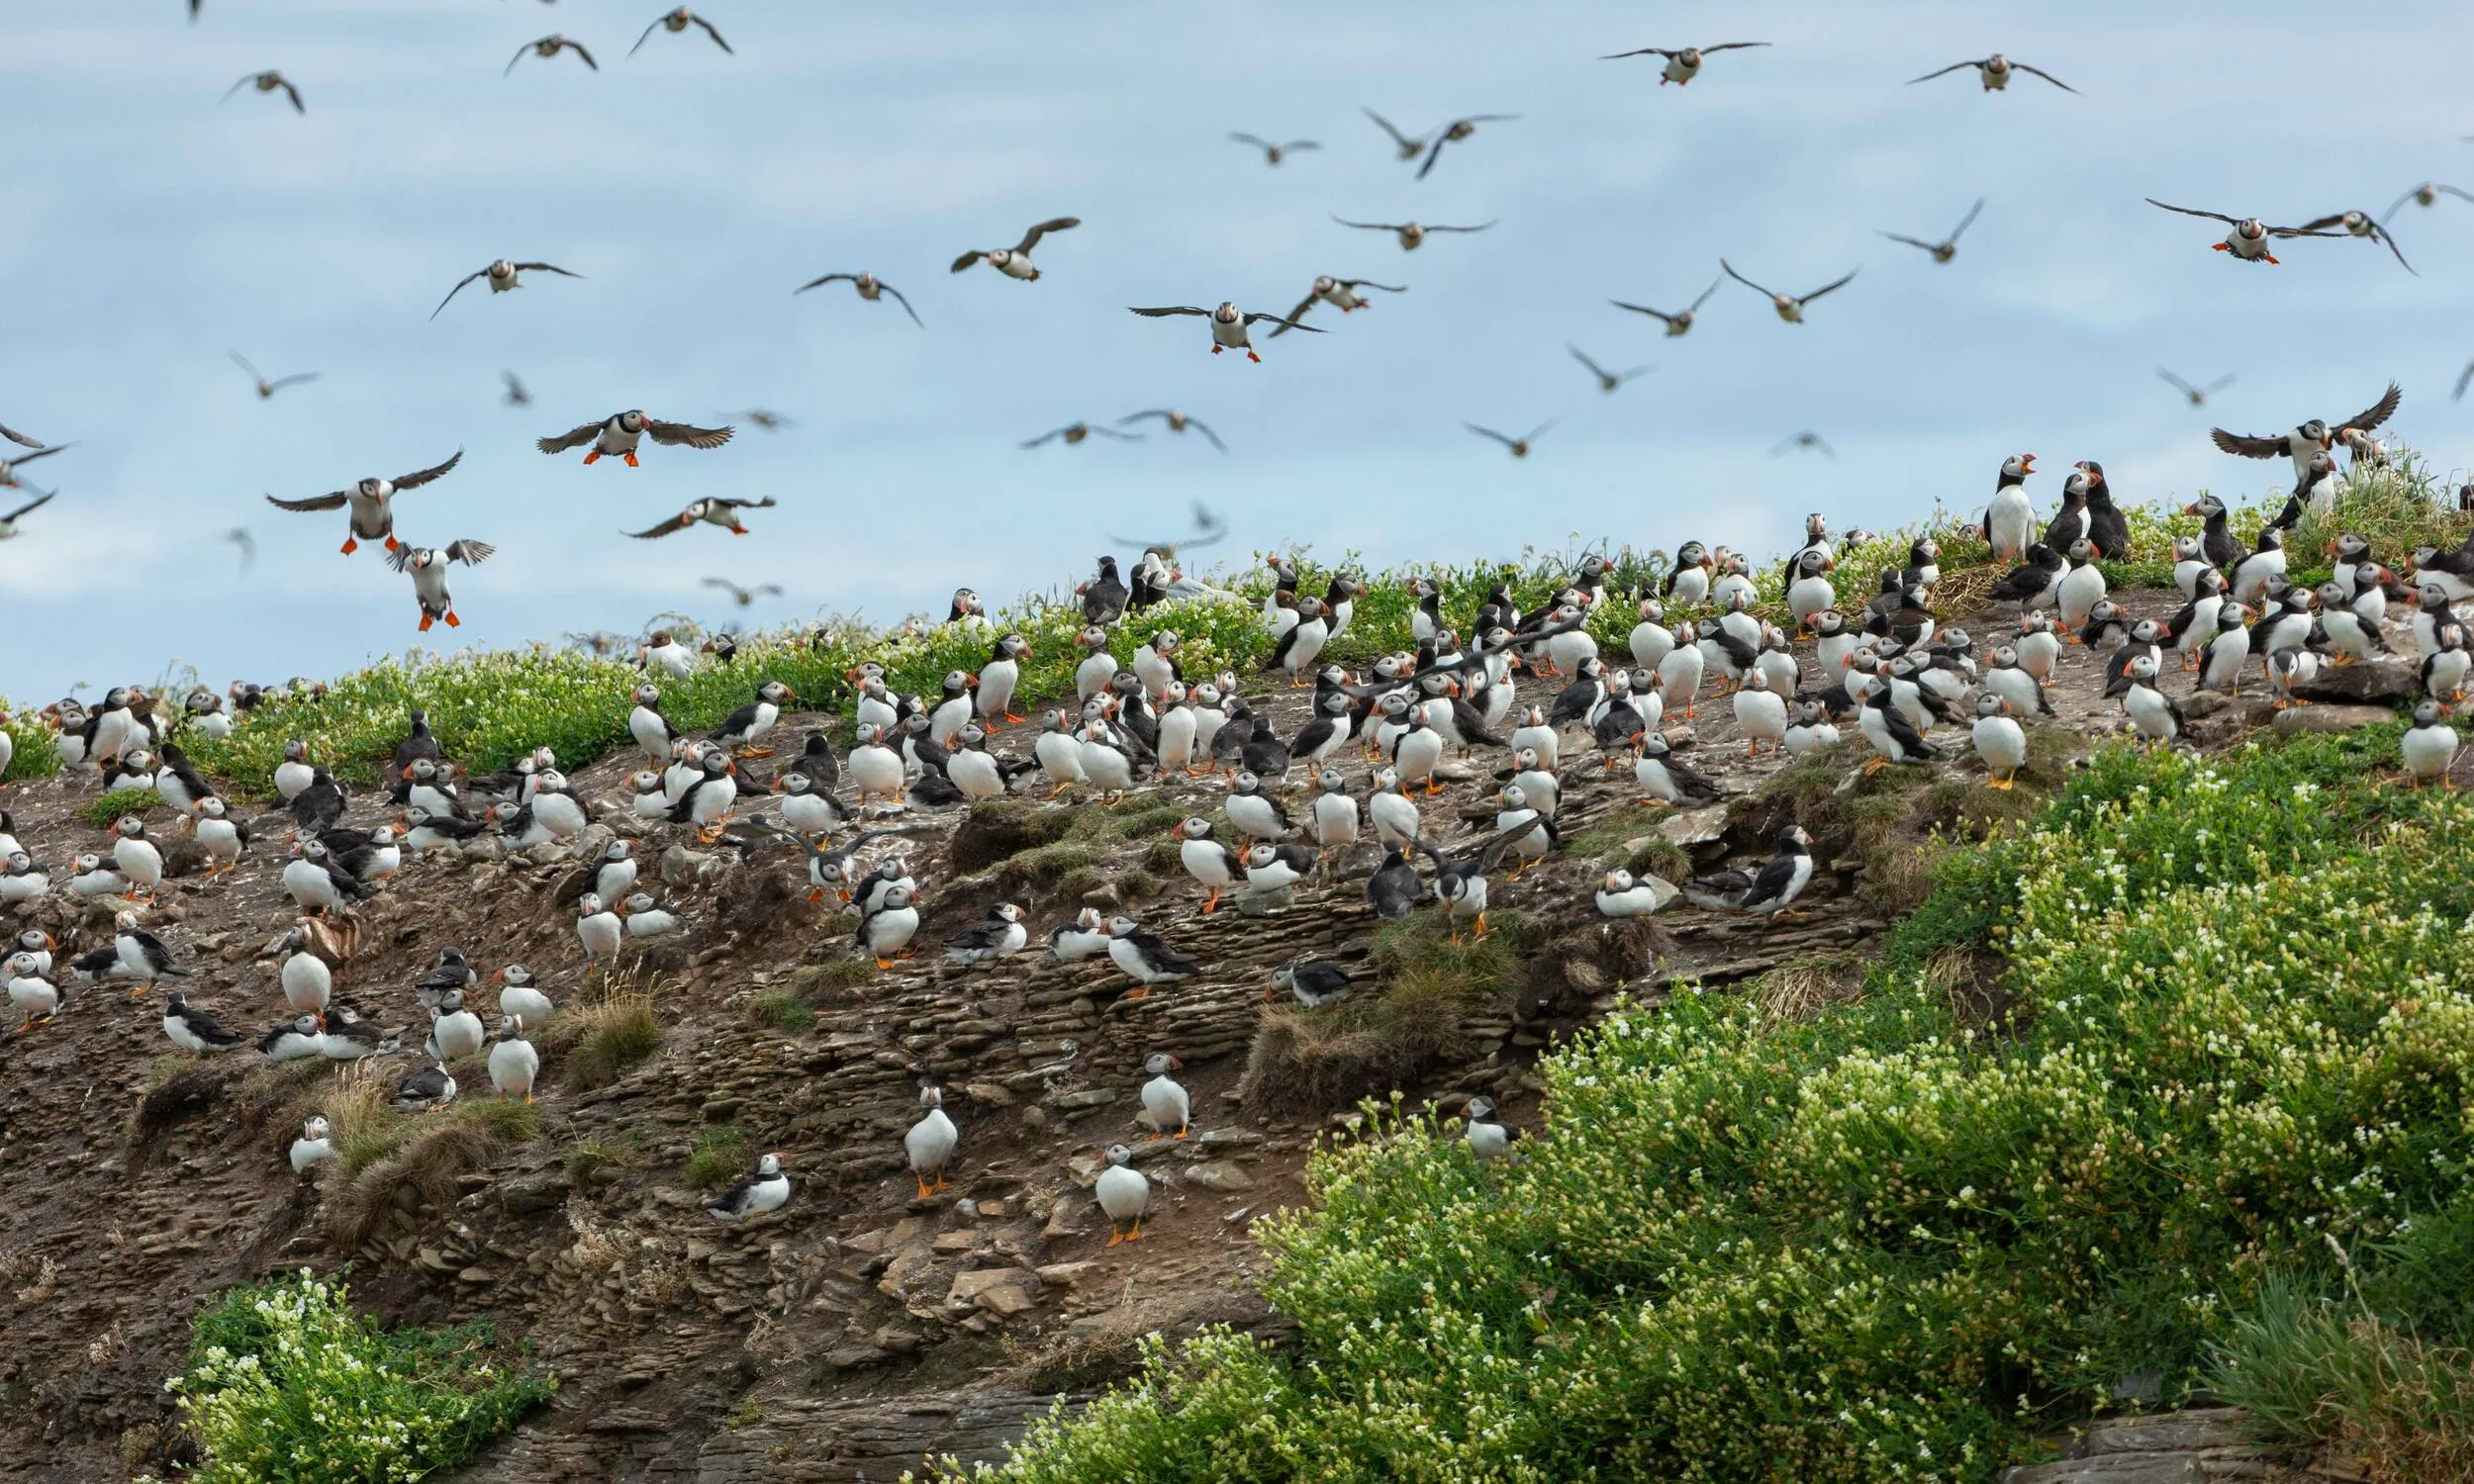 A view of puffins taking flight from a green and earthy ground, on Coquet Island.